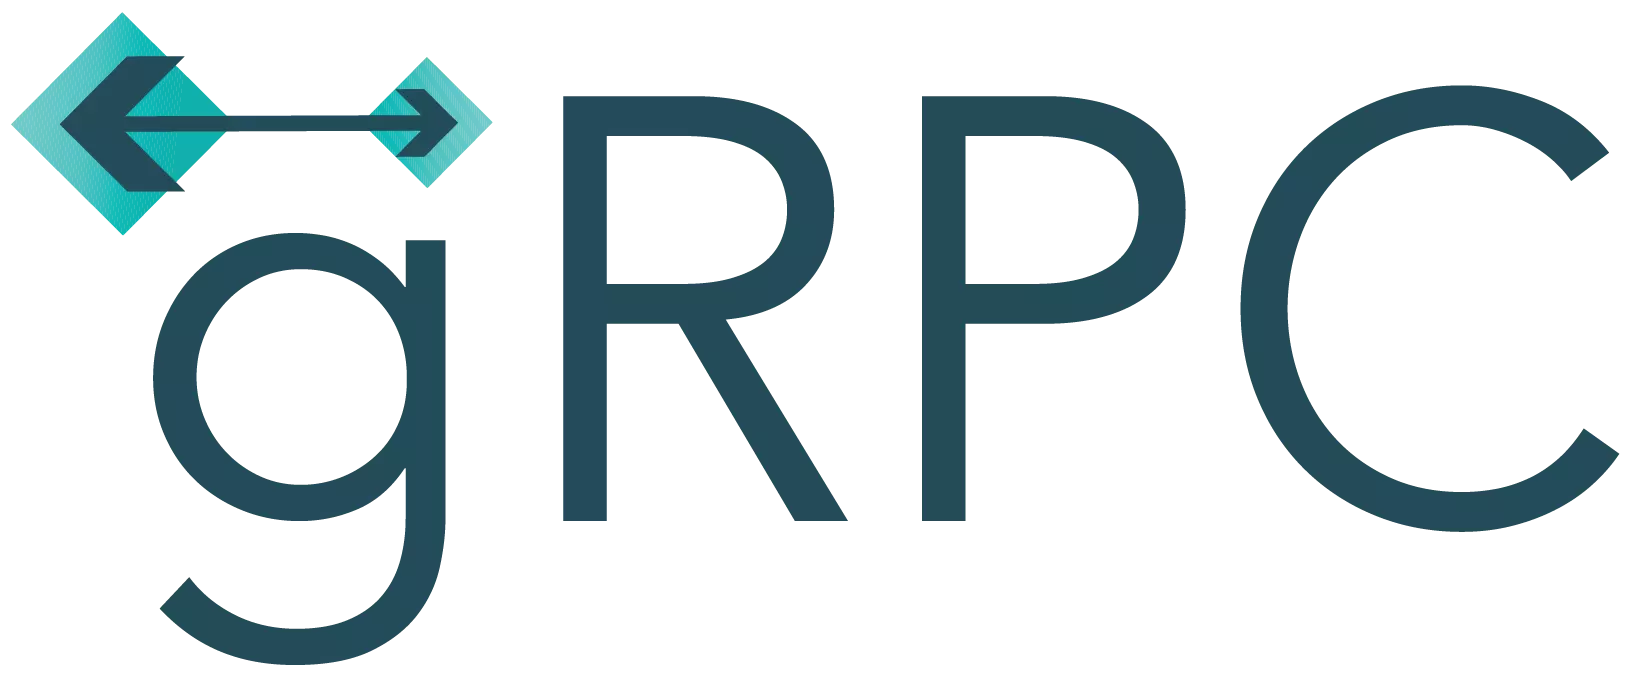 Introduction to gRPC